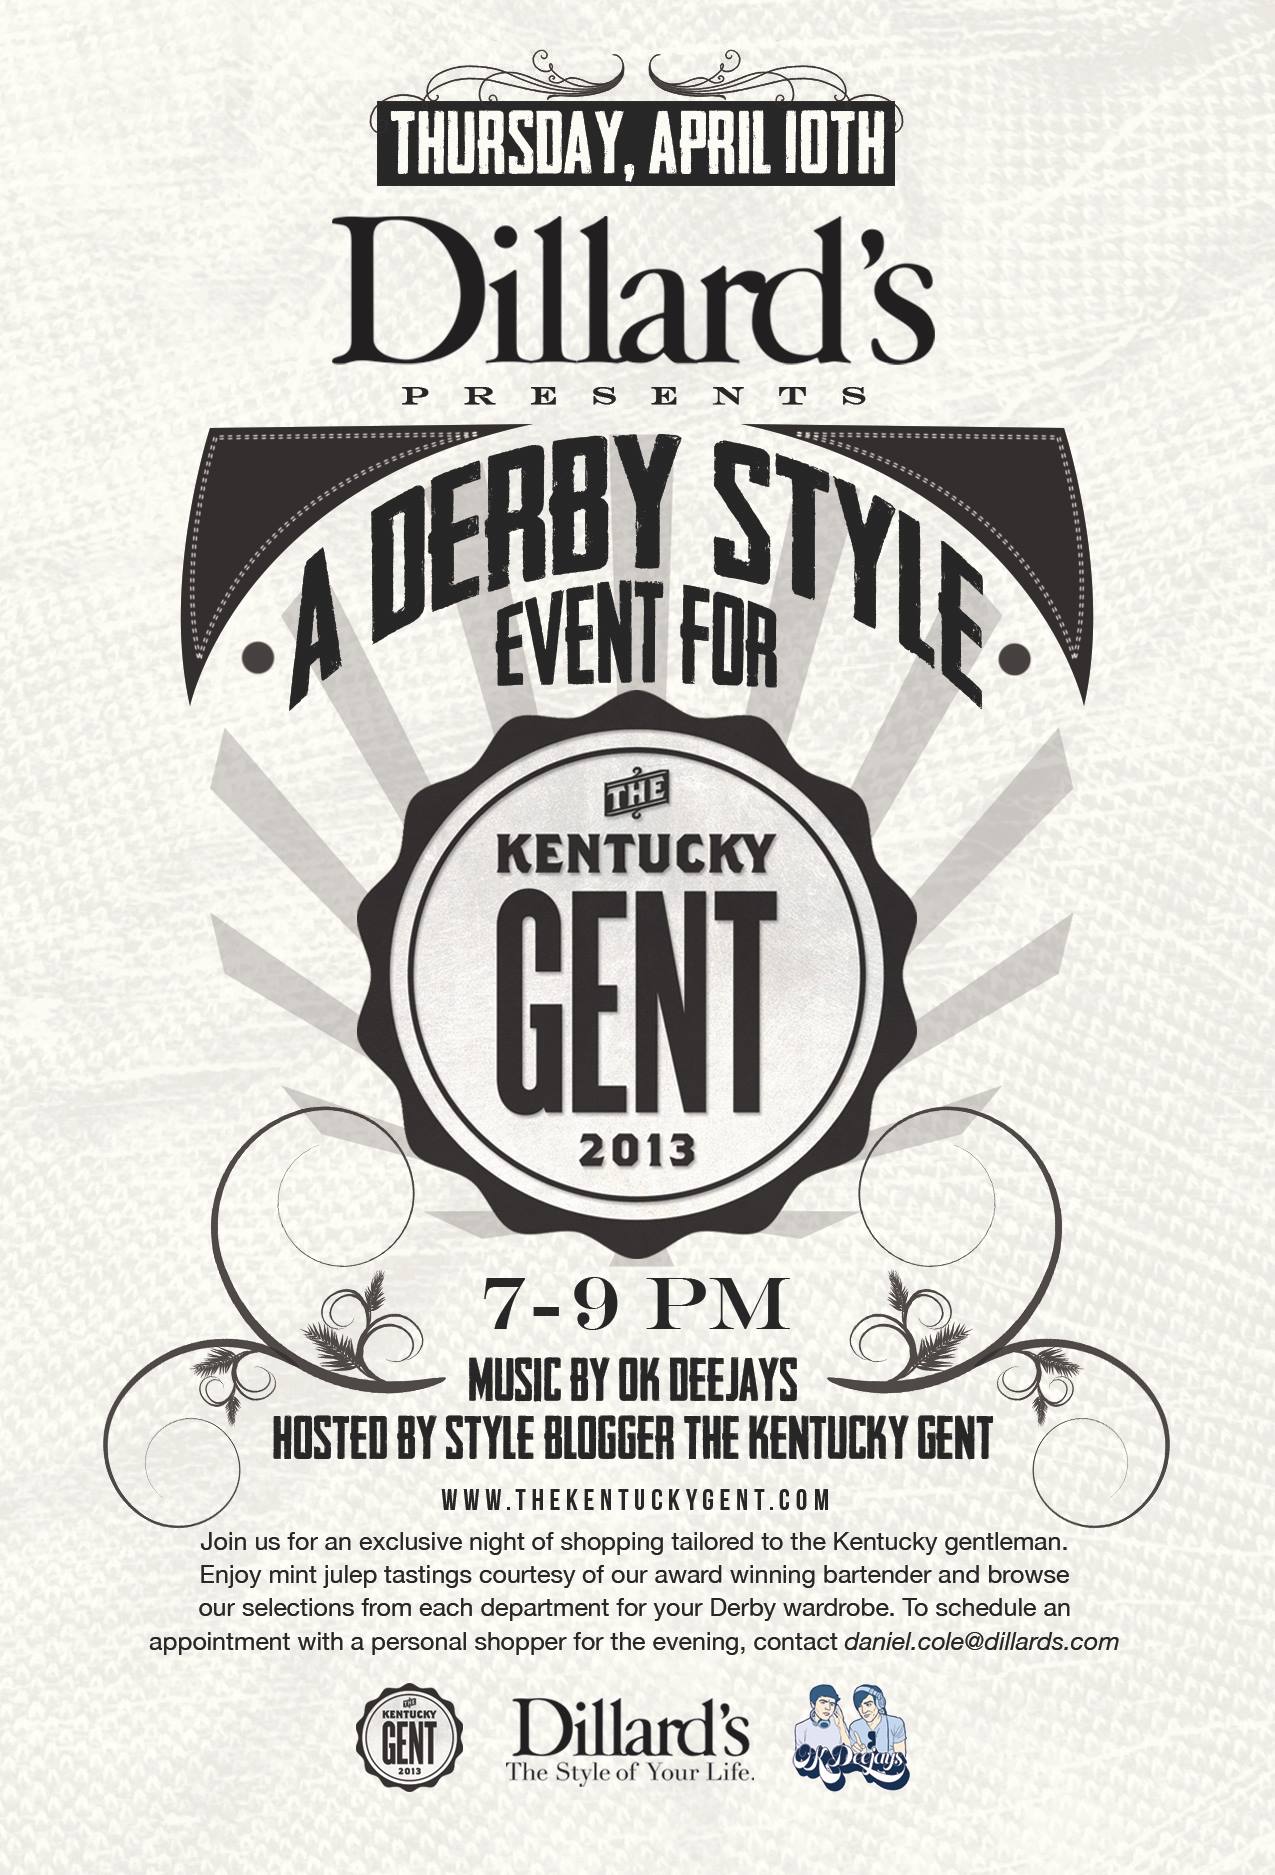 Dillard's Derby Style Event for The Kentucky Gent